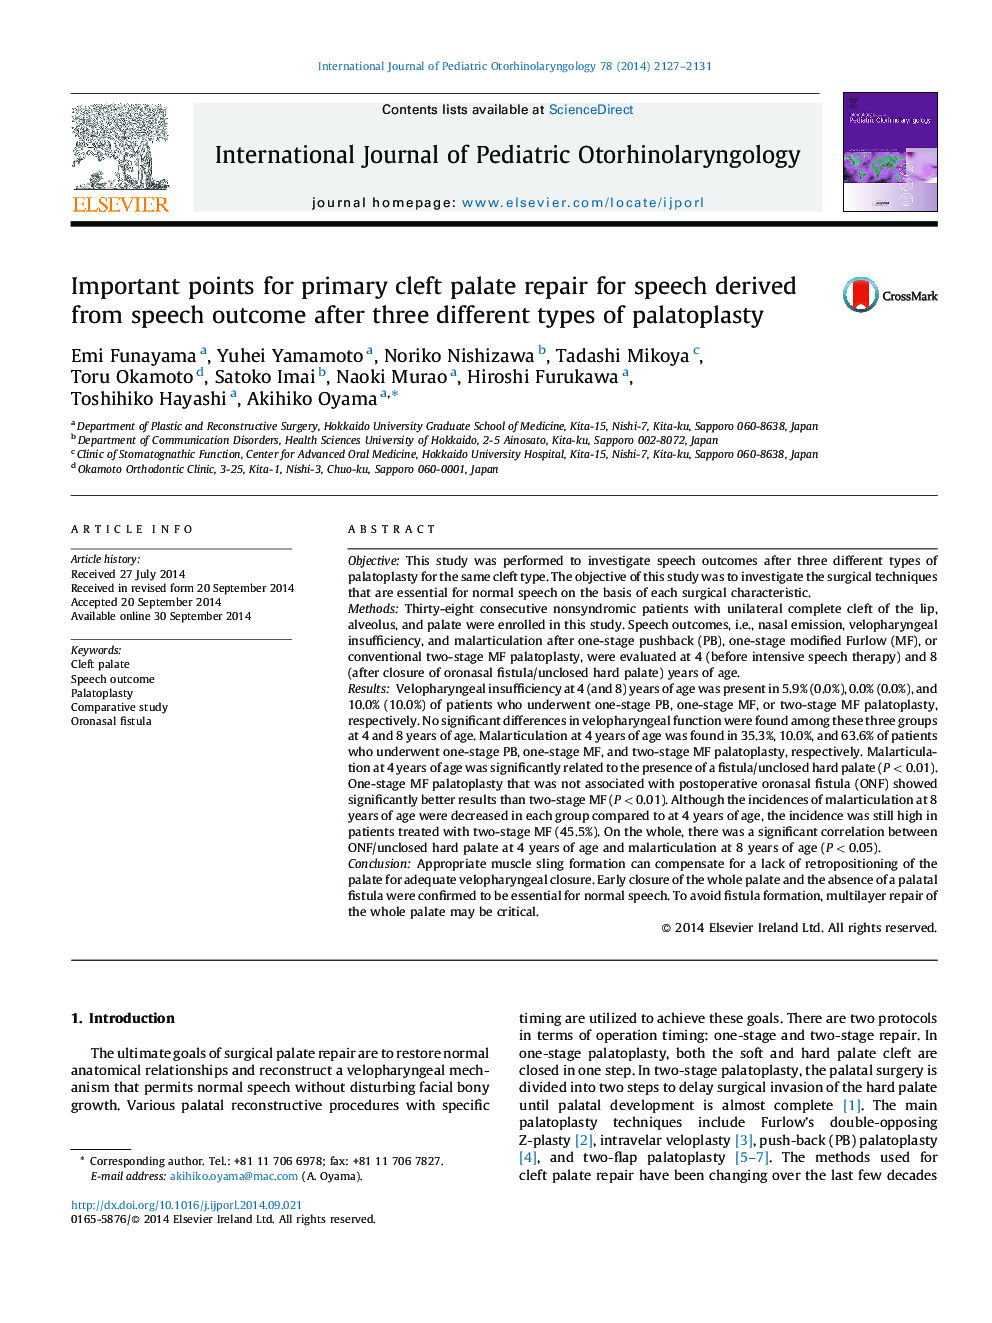 Important points for primary cleft palate repair for speech derived from speech outcome after three different types of palatoplasty